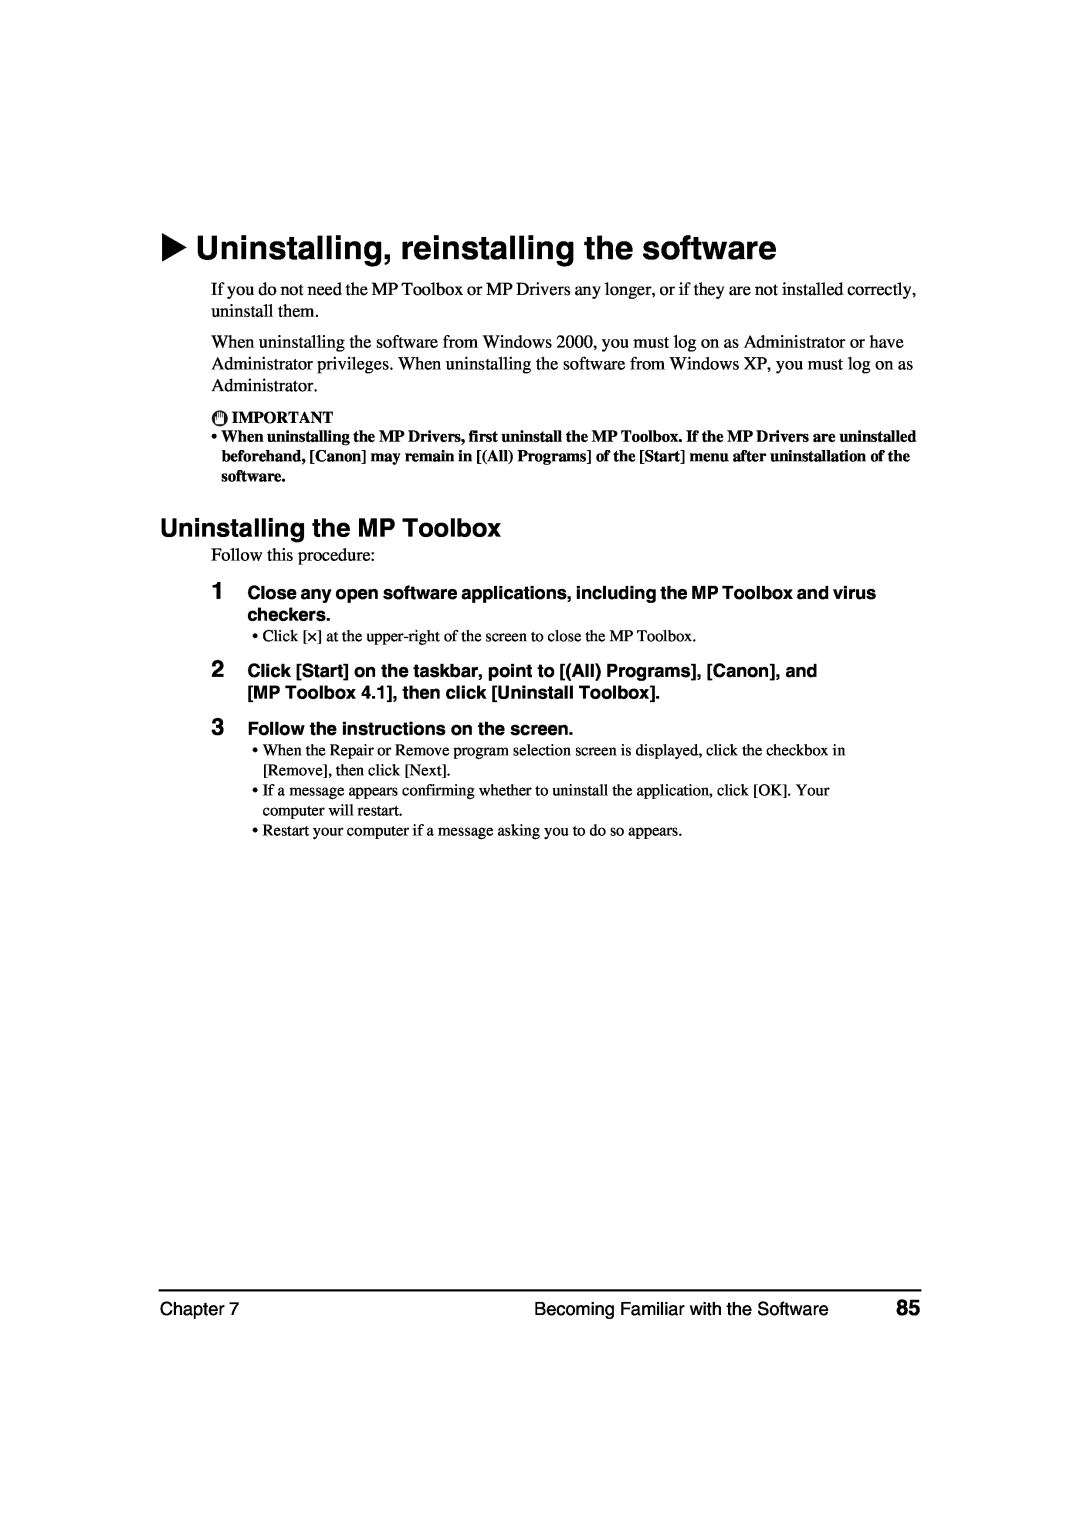 Canon MP370 Uninstalling, reinstalling the software, Uninstalling the MP Toolbox, Follow the instructions on the screen 